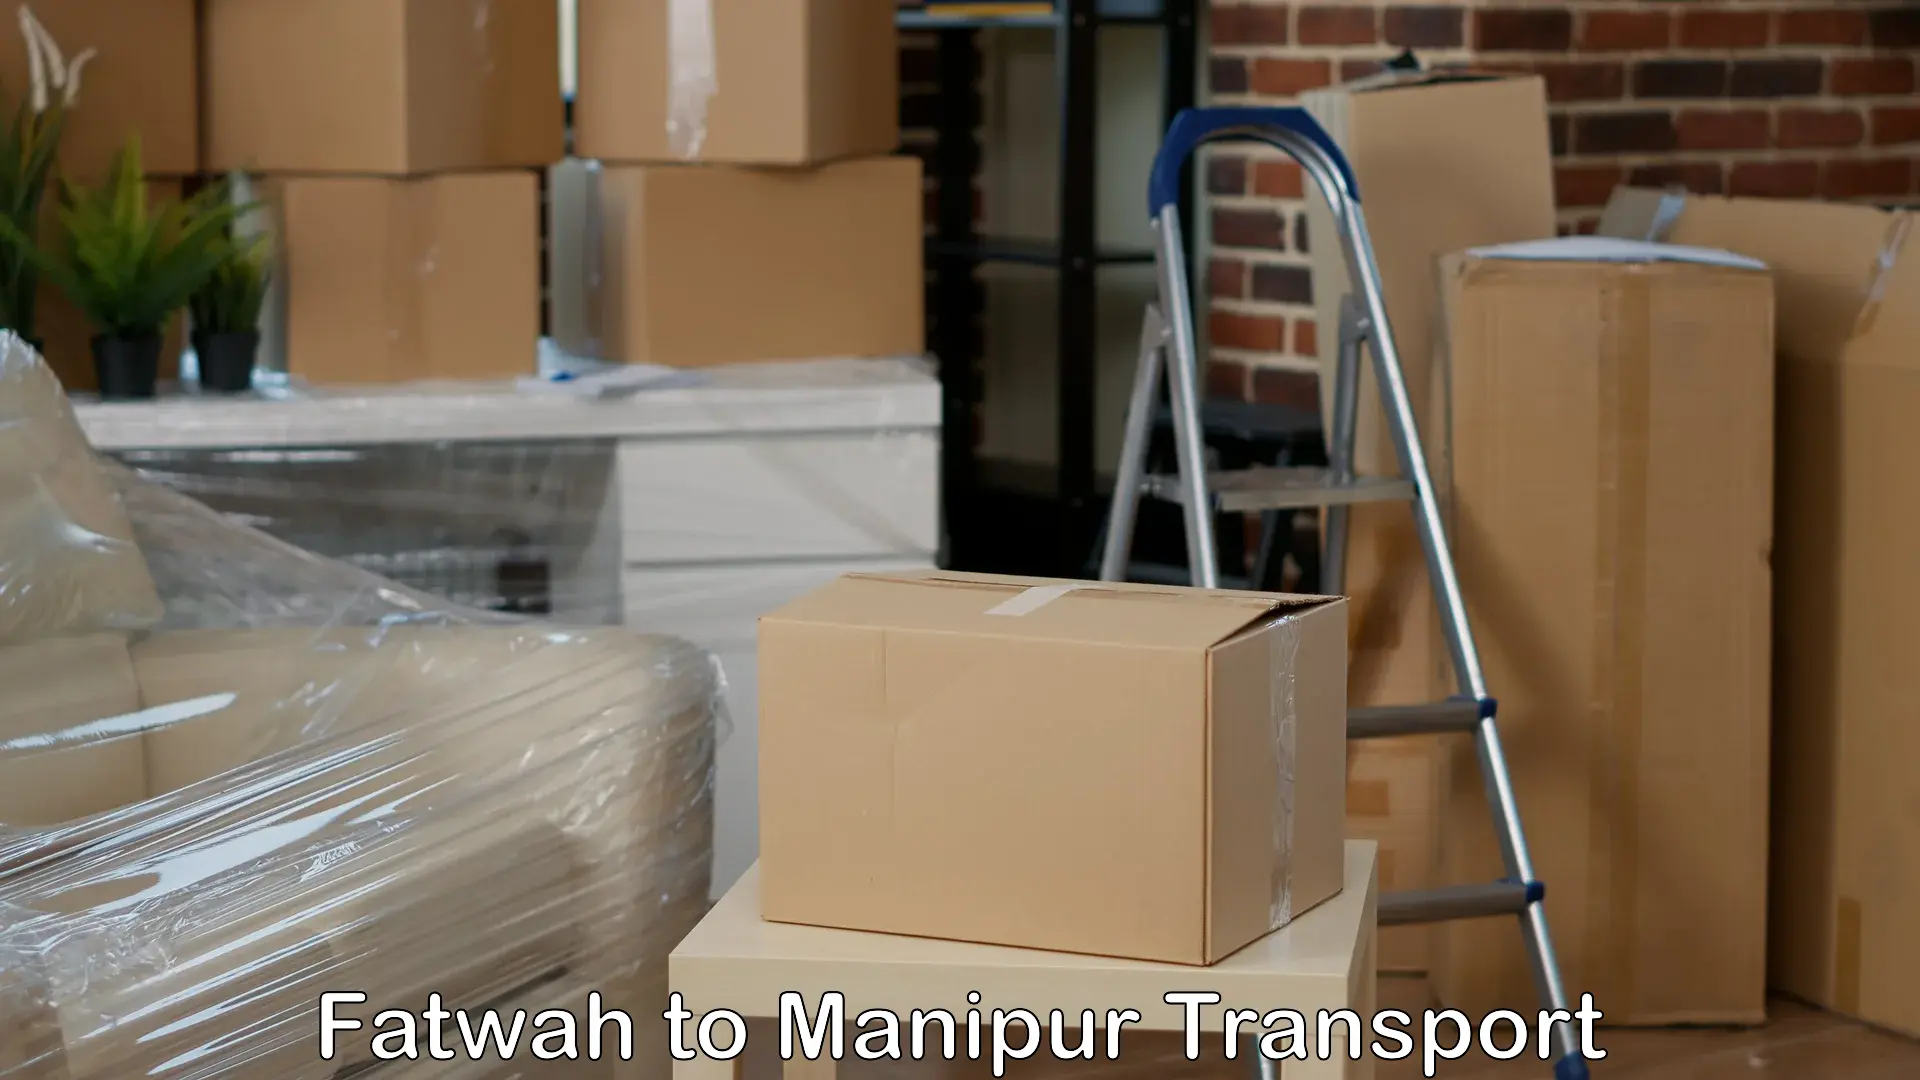 Nearby transport service Fatwah to Manipur